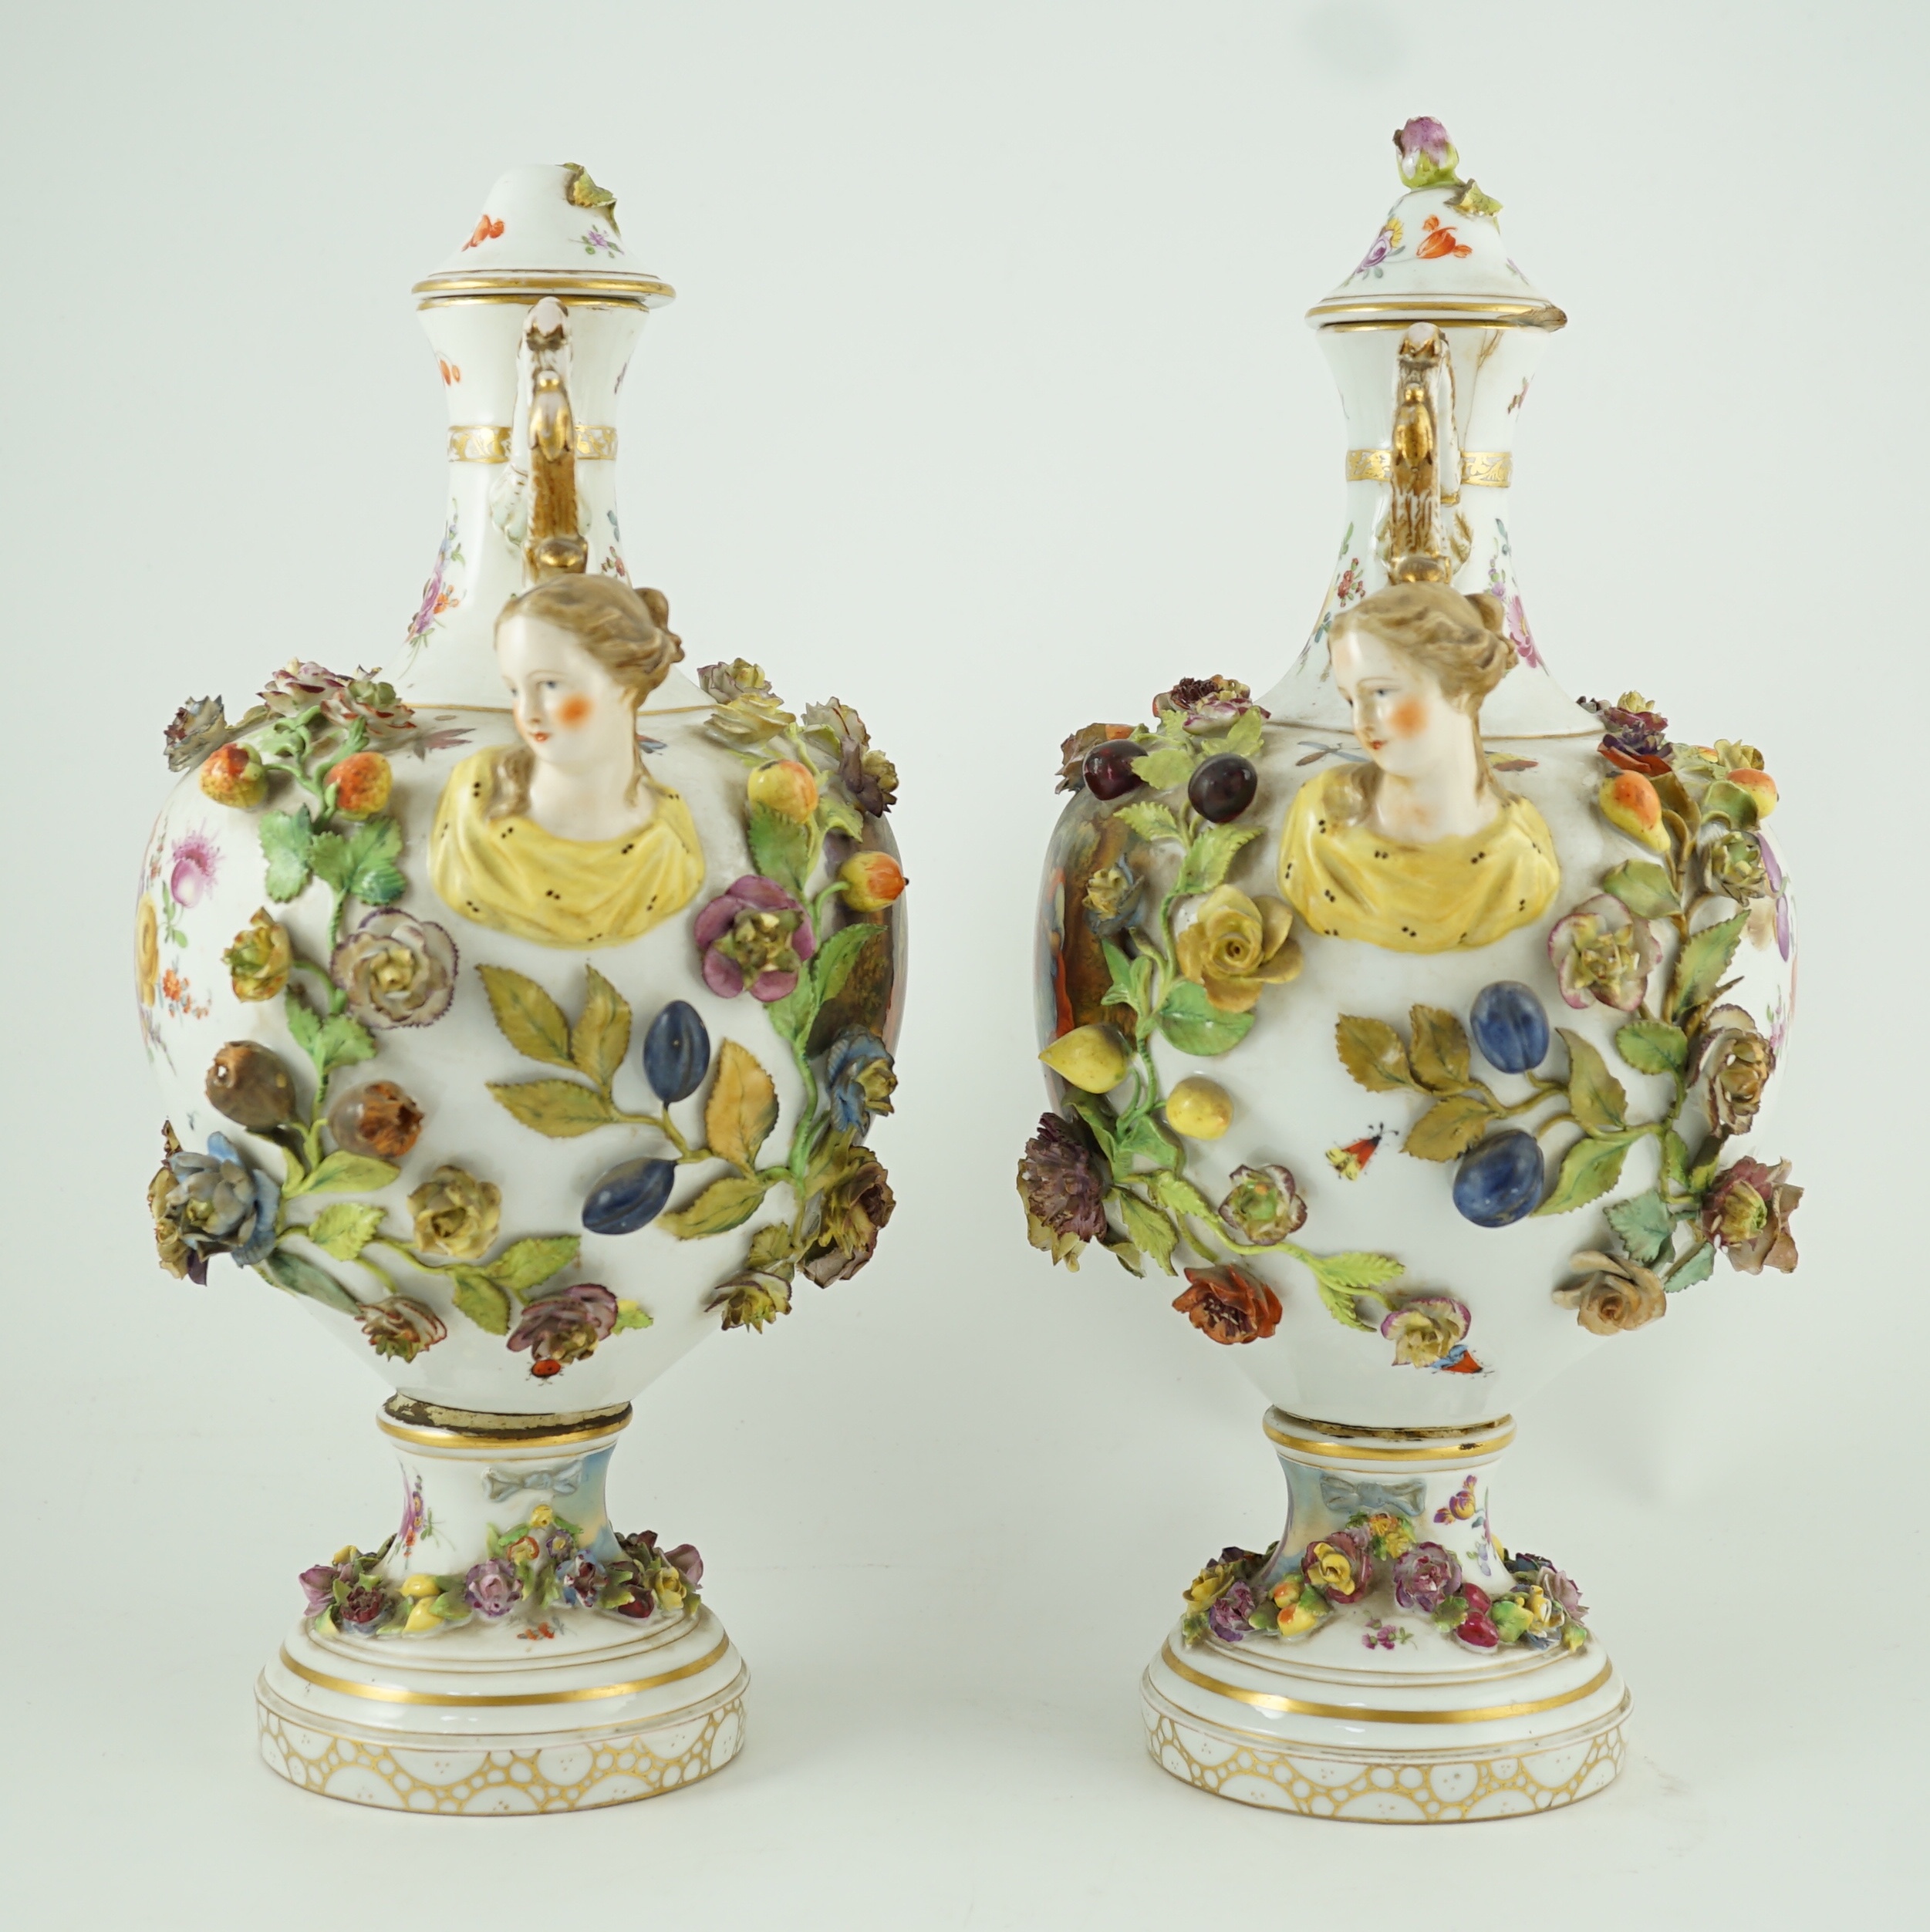 A pair of Potschappel porcelain vases and cover, late 19th century, 41cm high, slight damage